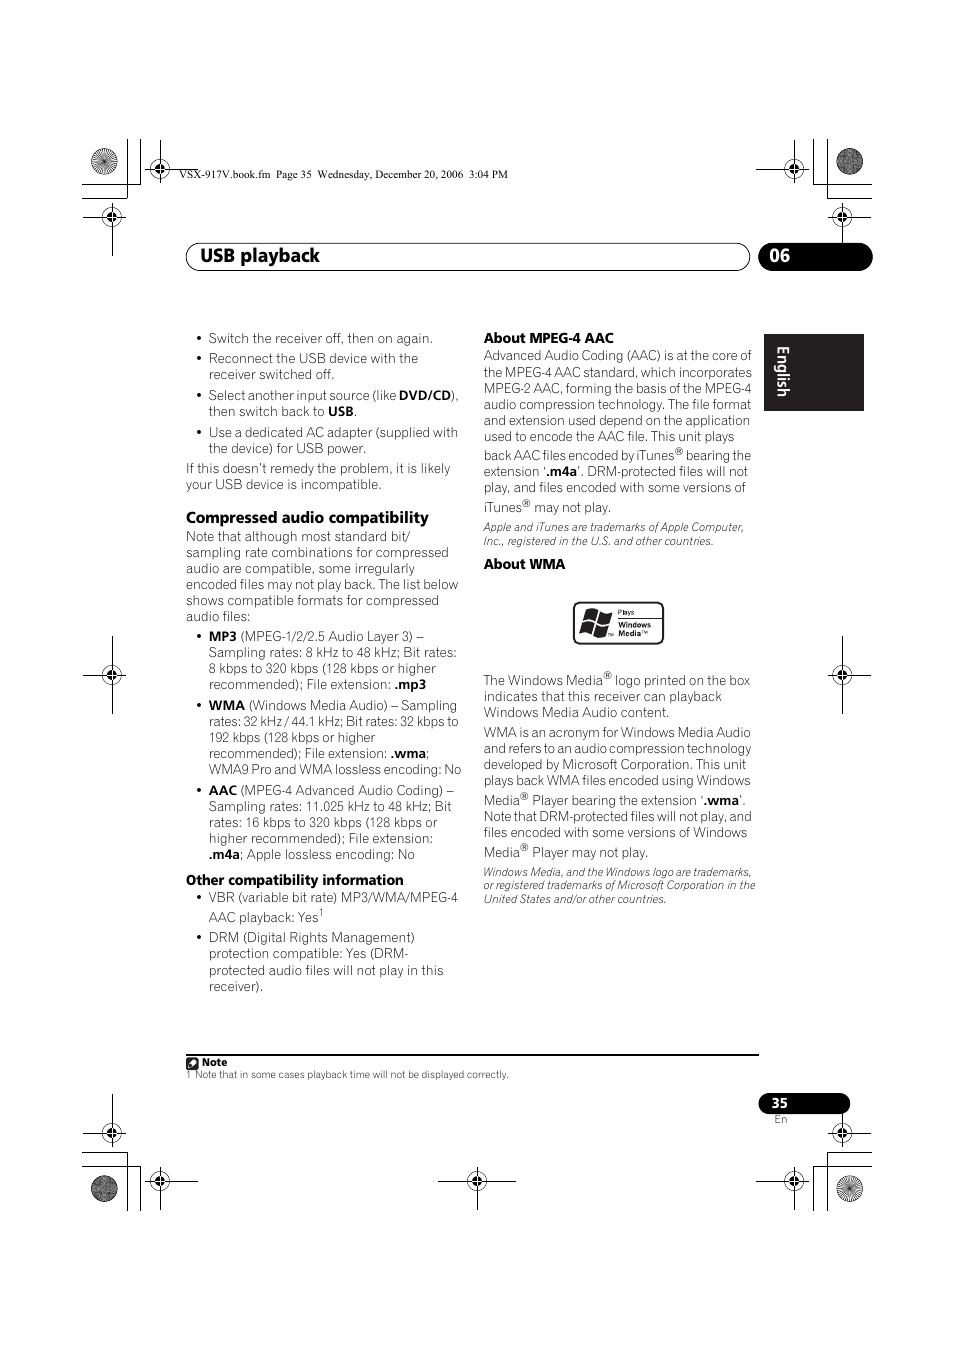 Compressed audio compatibility, Usb playback 06 | Pioneer VSX-917V-S/-K  User Manual | Page 35 / 70